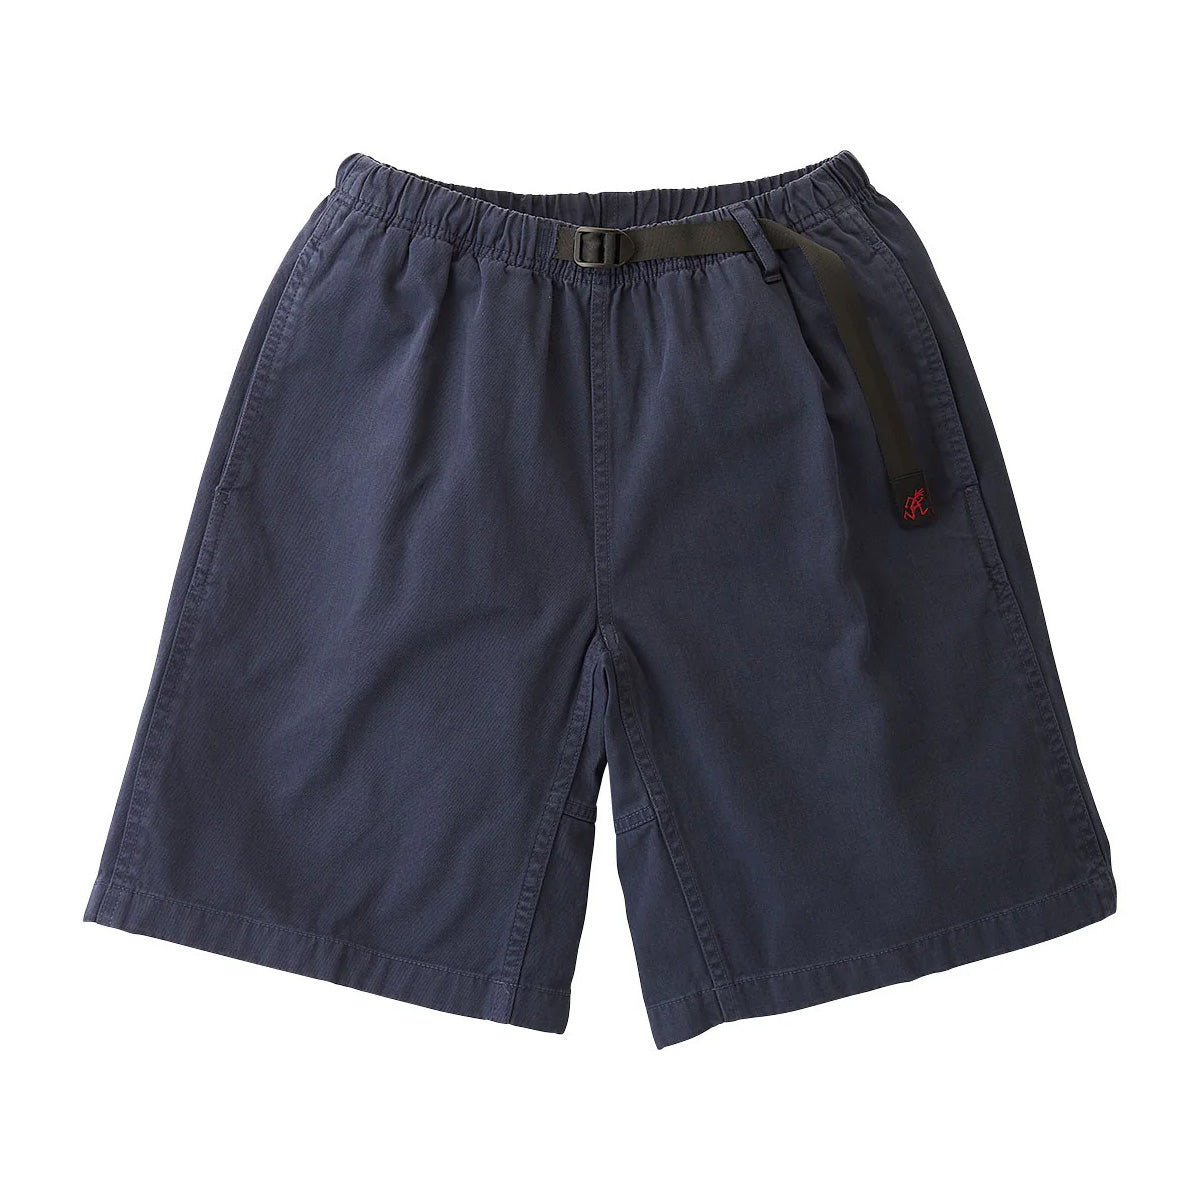 Navy gramicci outdoor shorts with adjustable waist. Free uk shipping over £50